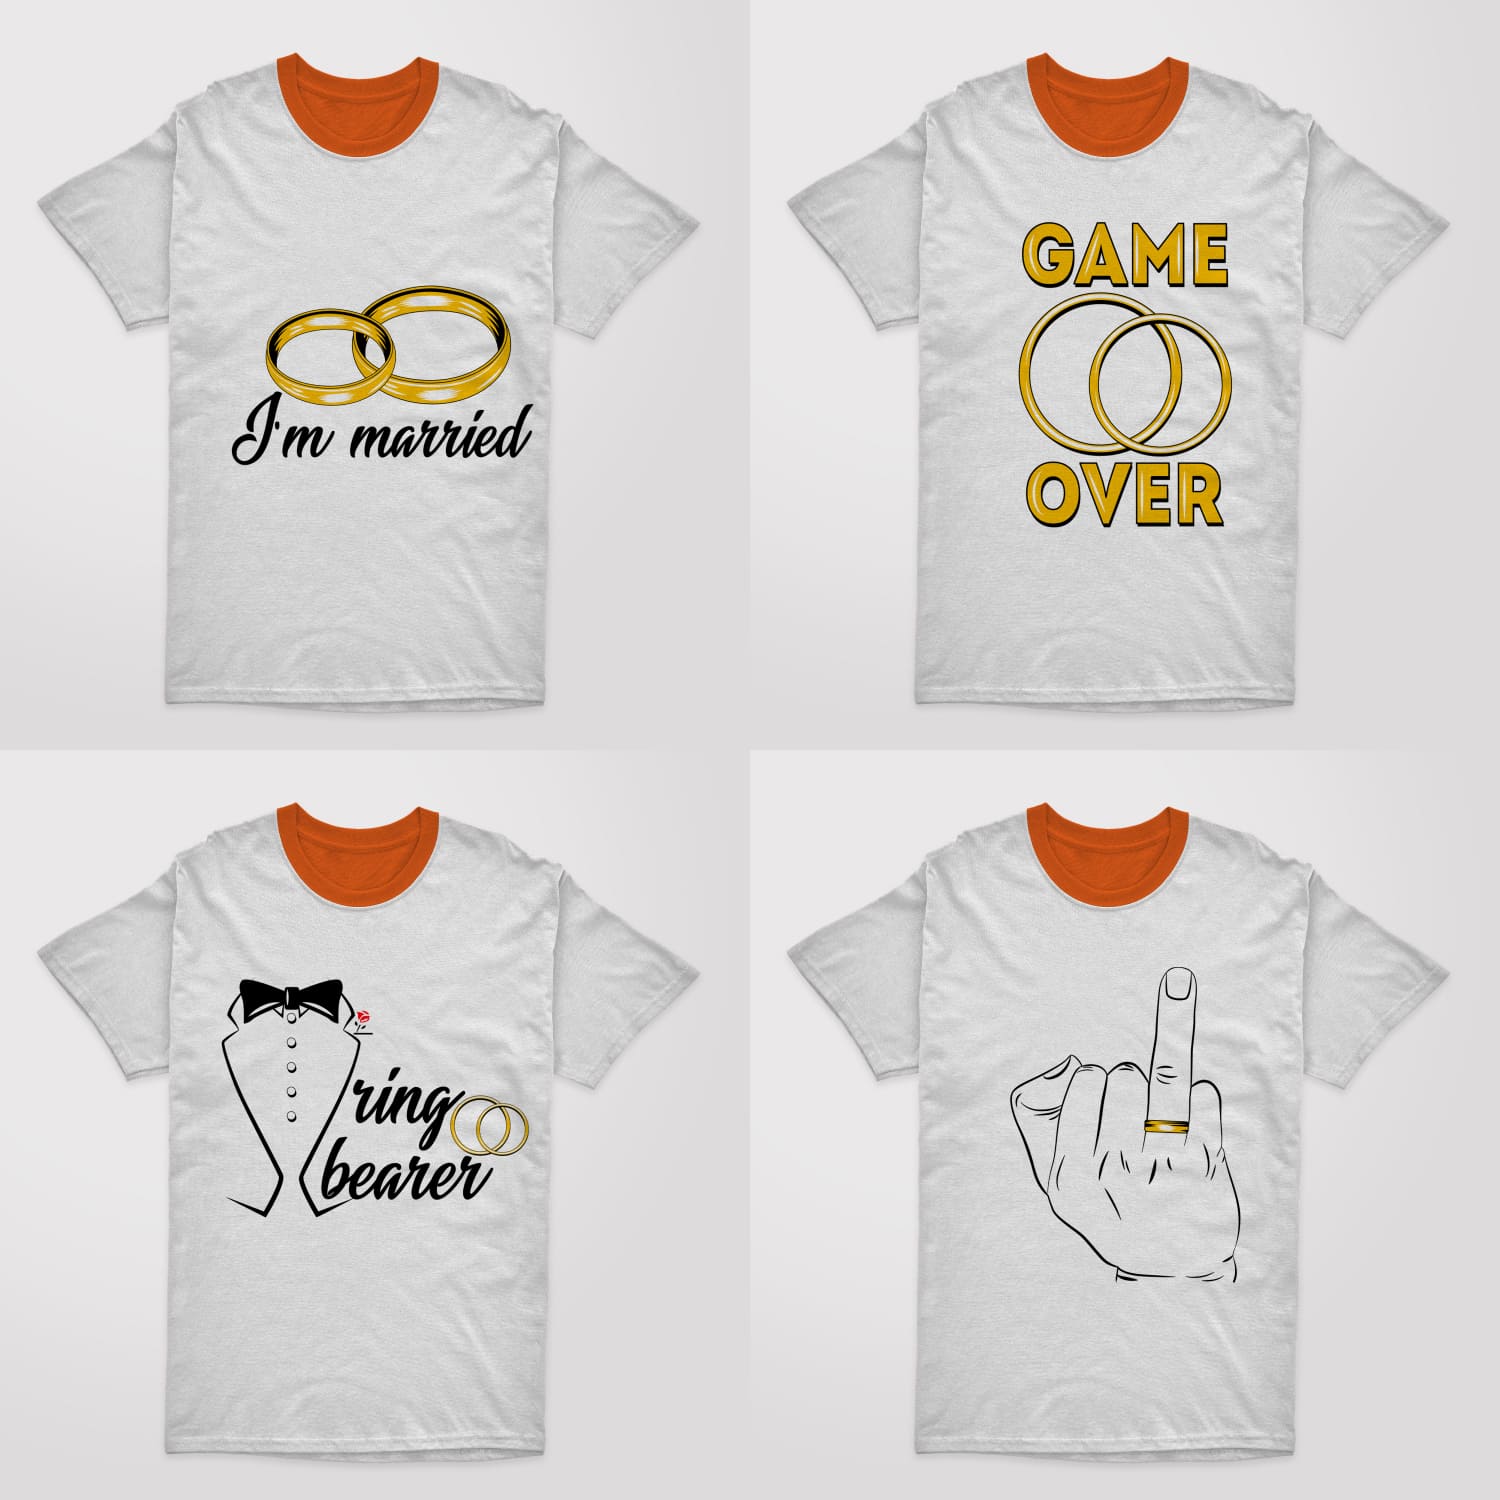 A set of images of T-shirts with gorgeous prints of men's wedding rings.